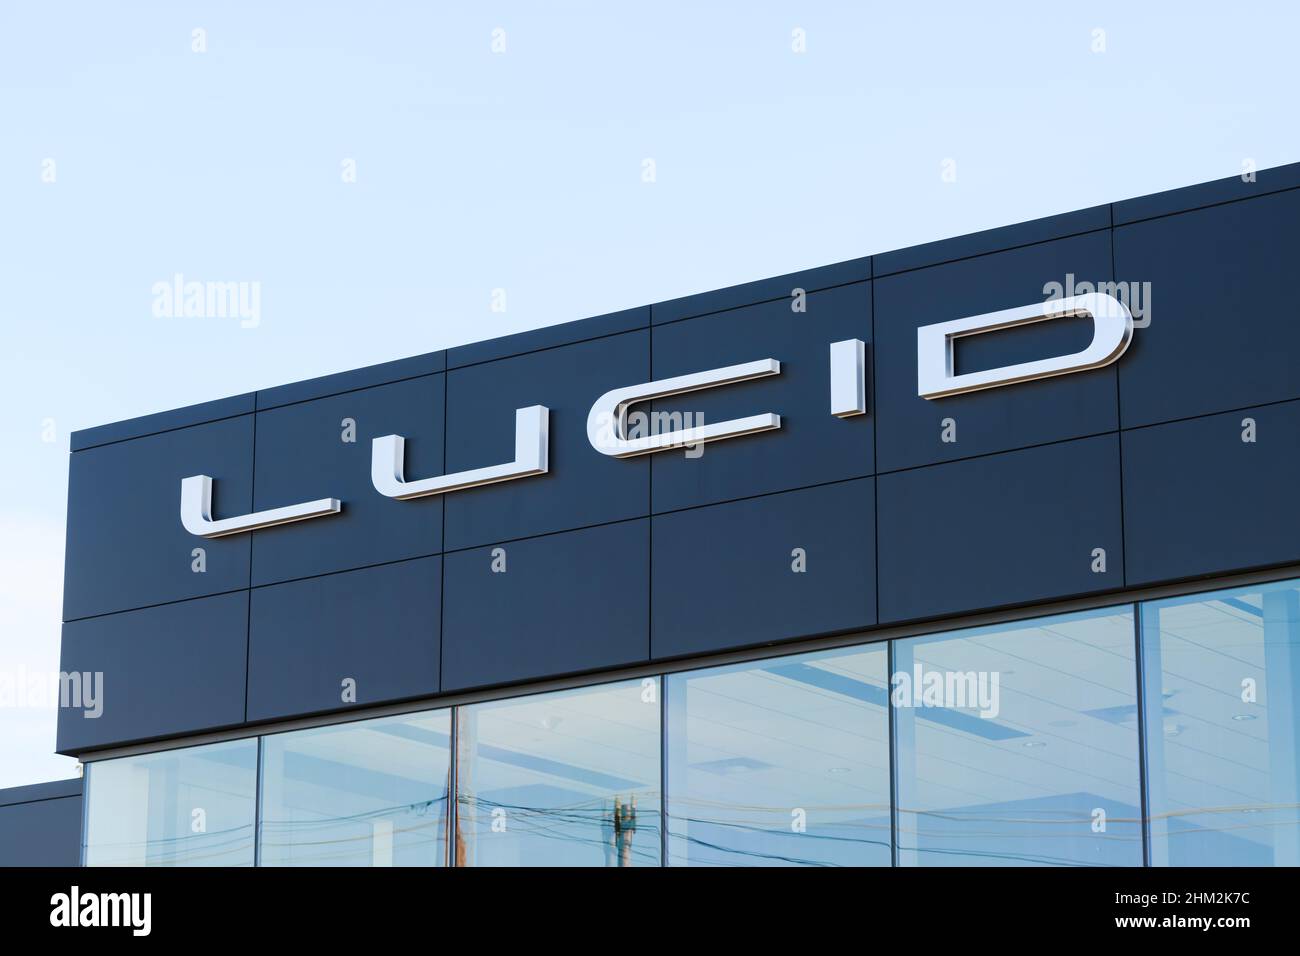 Seattle - February 06, 2022; Sign on a building for the Lucid Motors brand and logo in Seattle against a clear sky Stock Photo